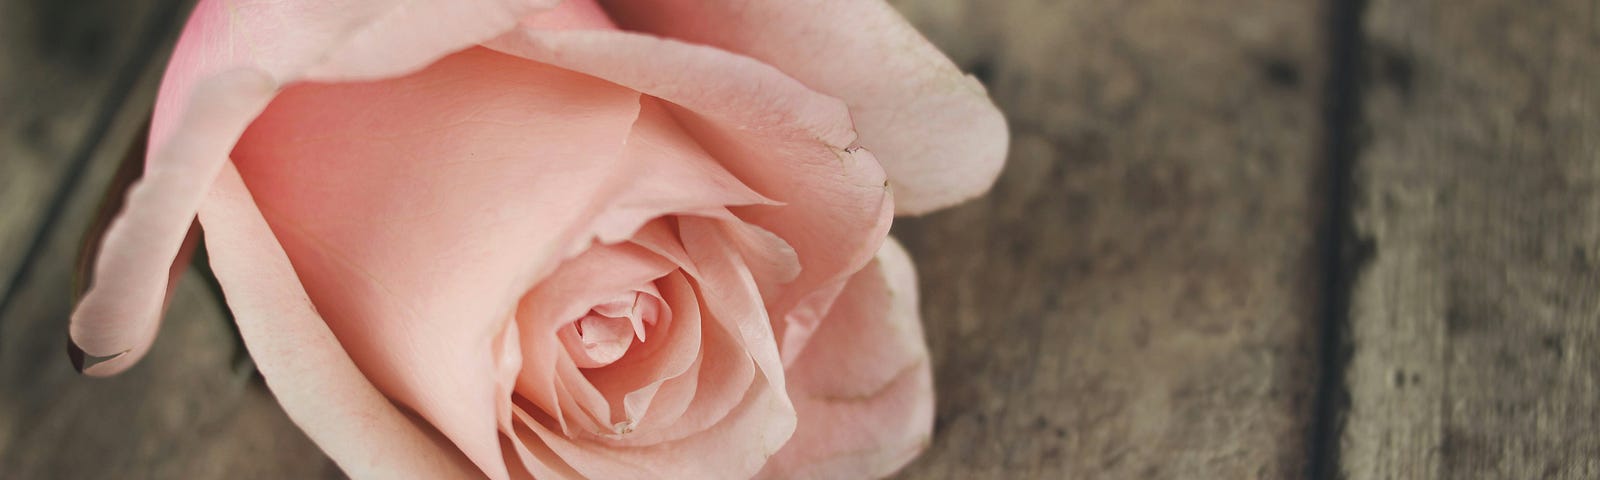 A pale pink rose lain on a wooden surface